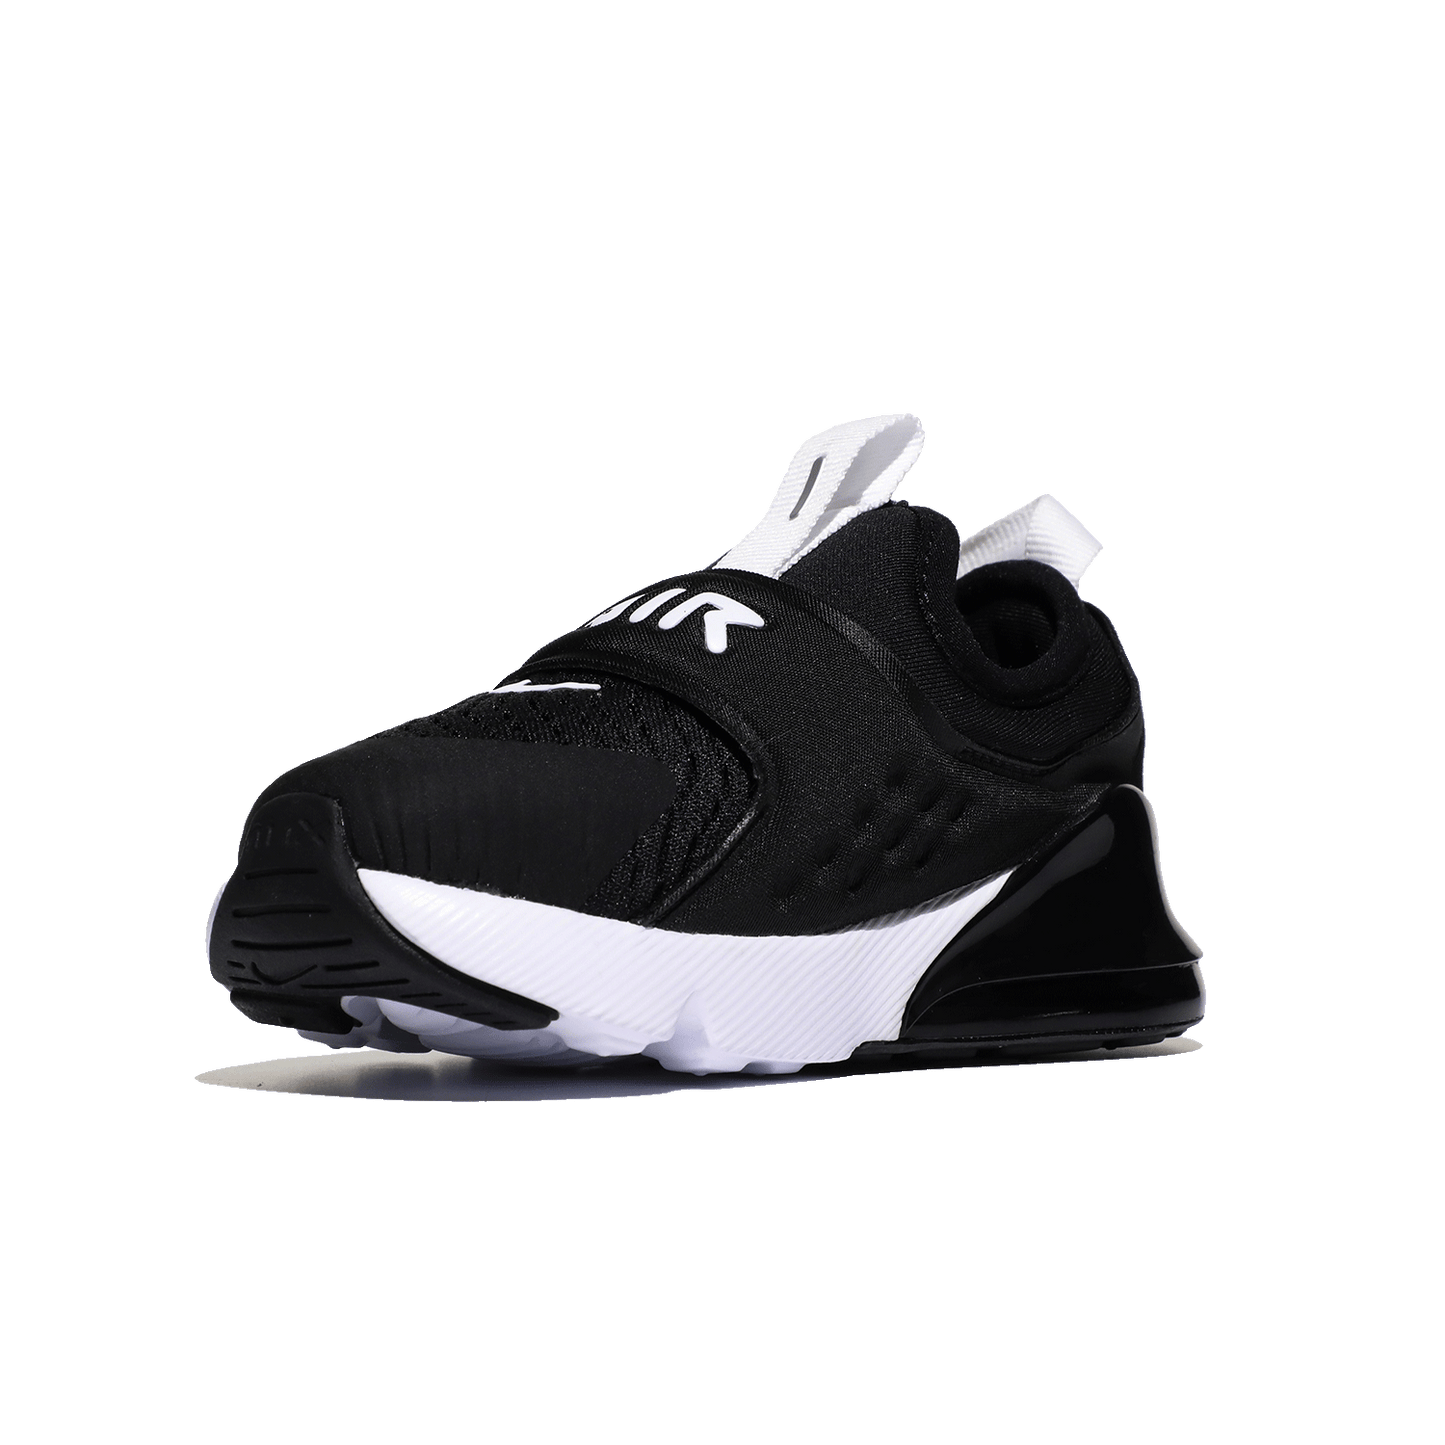 Image 5 of Air Max 270 Extreme (Infant/Toddler)